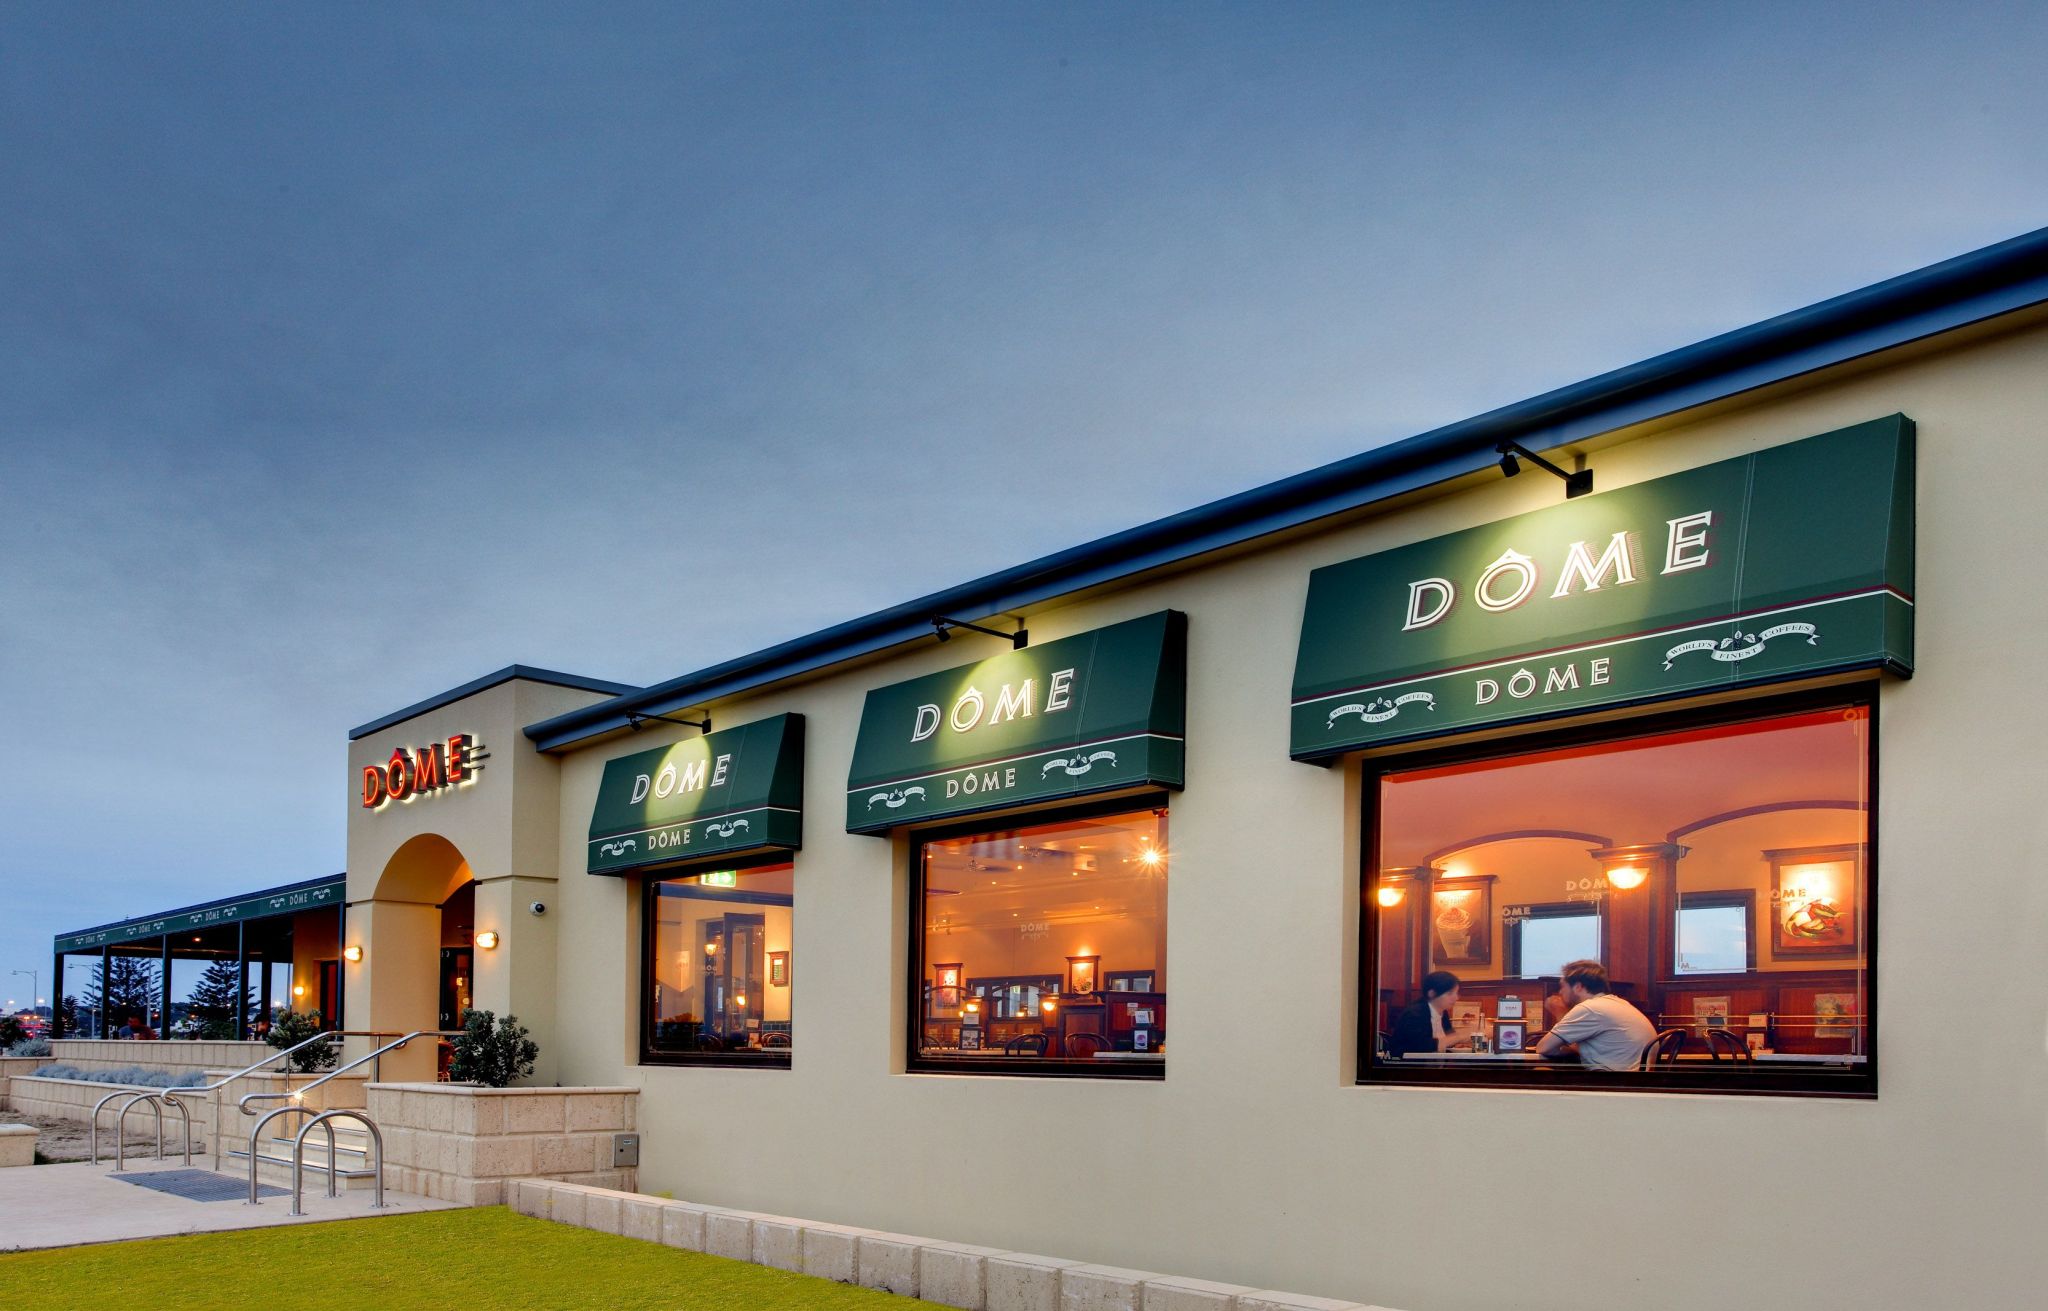 Kenlow's commercial awnings outside of Dome cafe in Perth